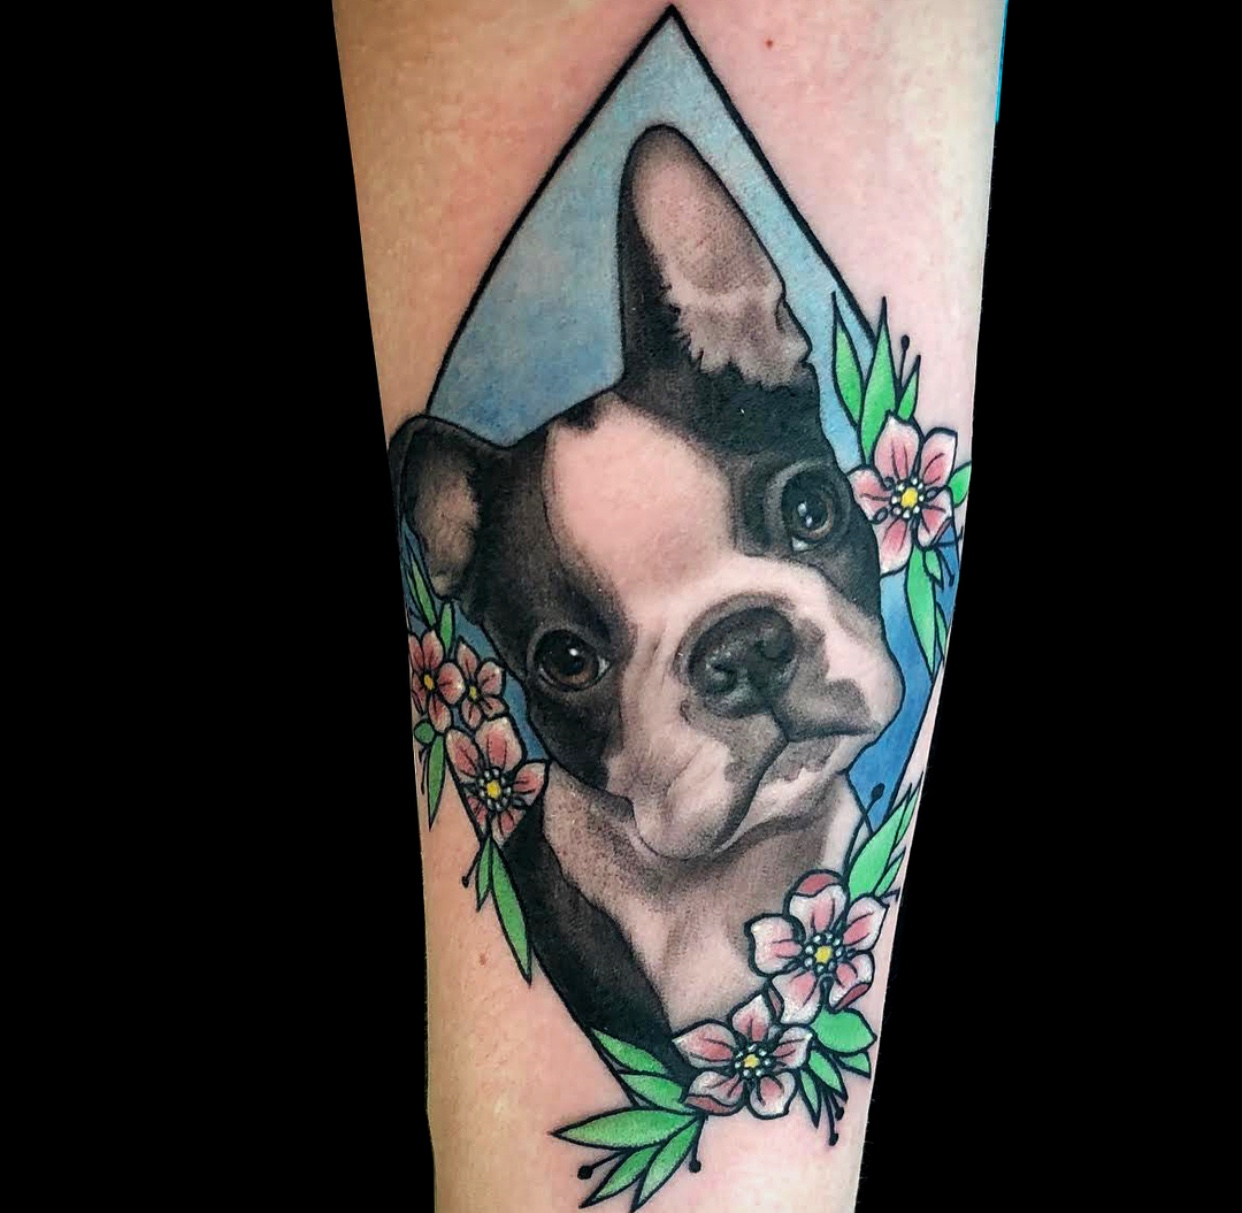 black and white patterned Boston Terrier in a blue diamond with flowers tattoo on the forearm